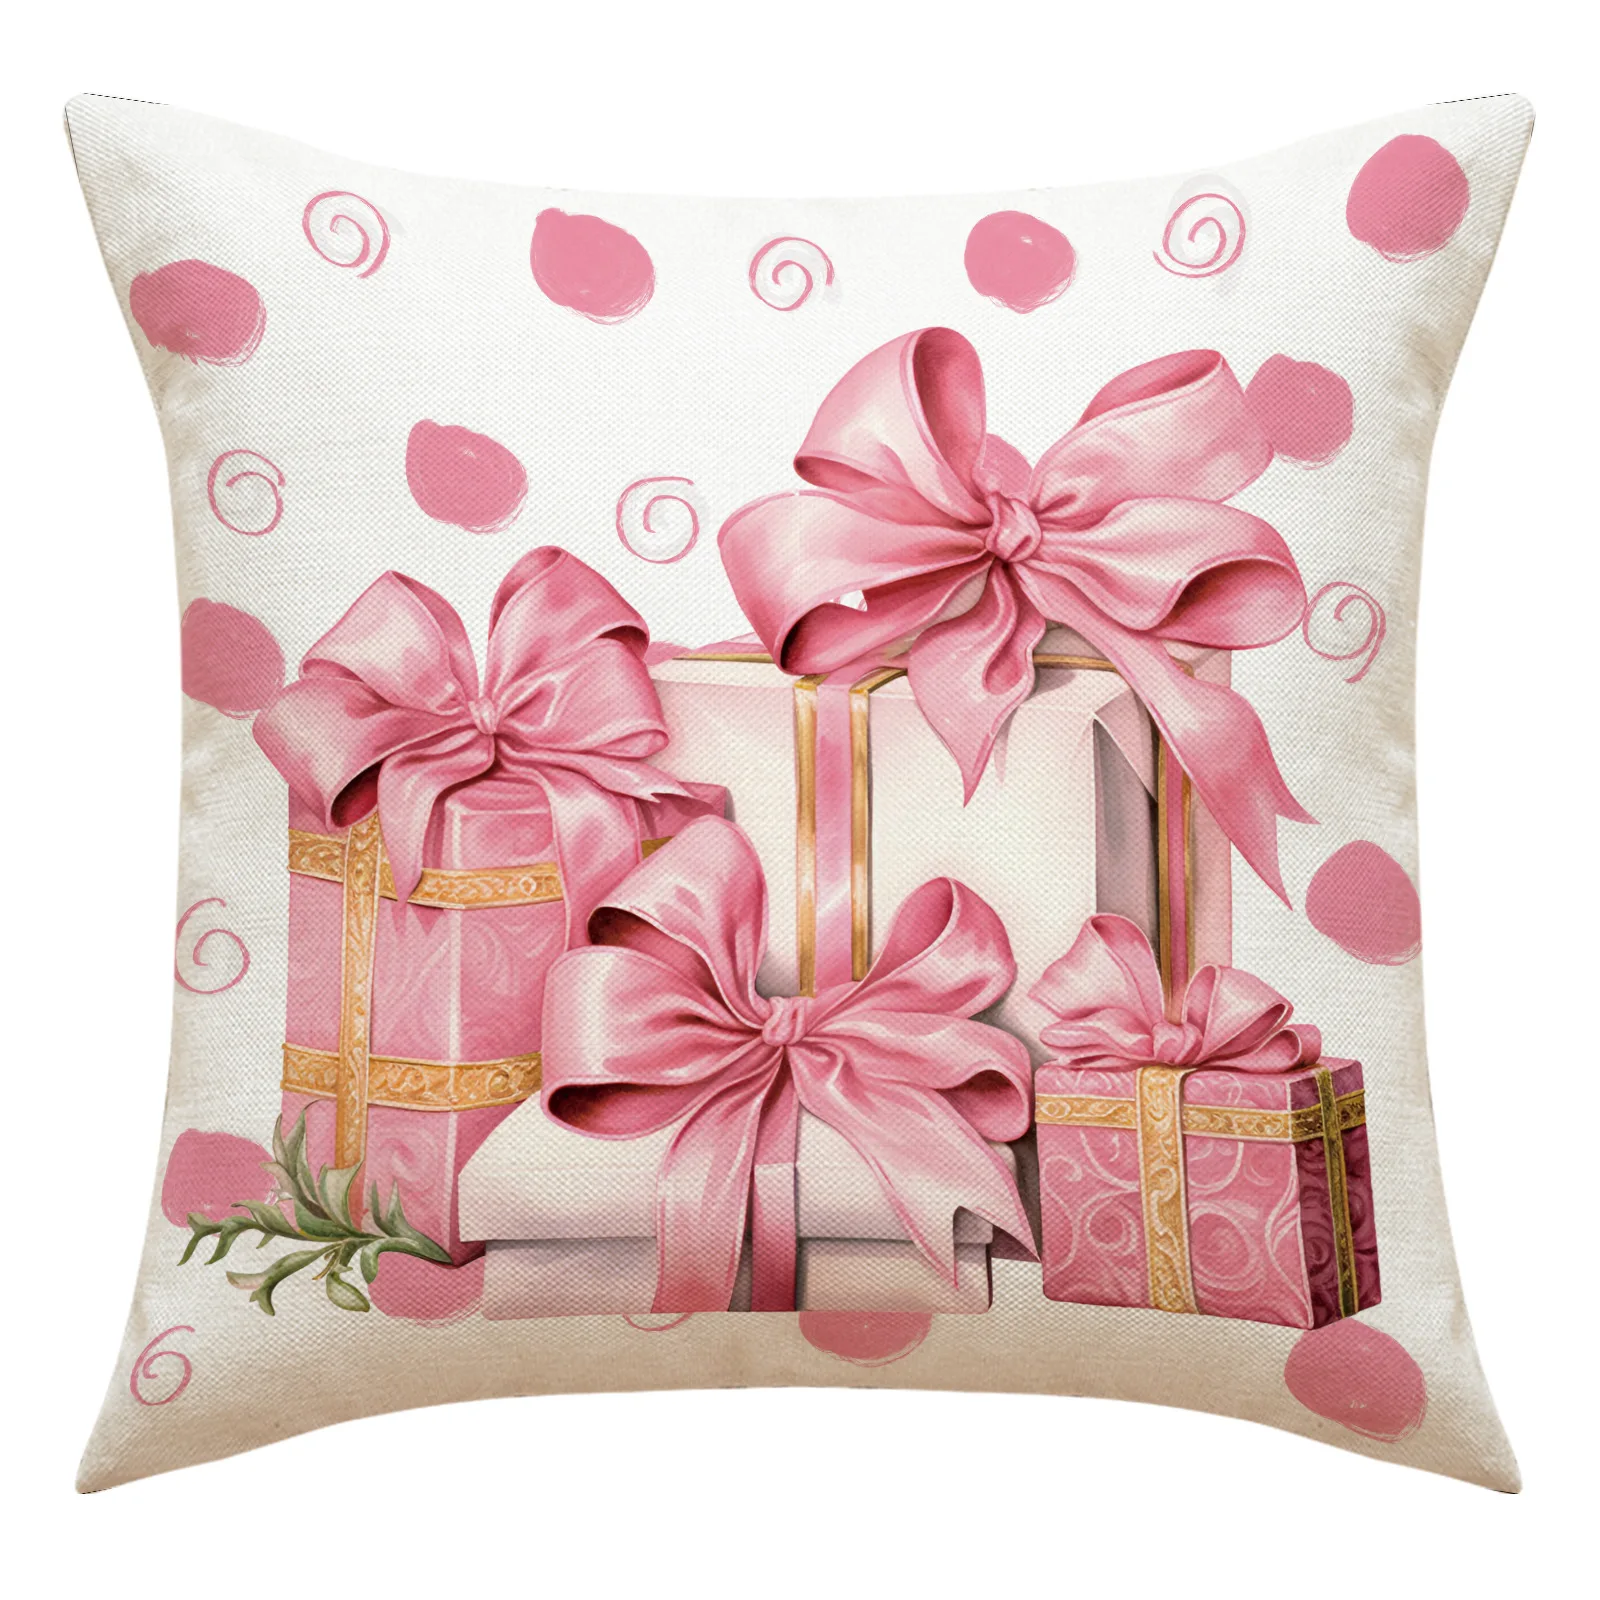 https://ae01.alicdn.com/kf/S1c42827598cb4e5ea21f8063176bd485f/Christmas-Pillow-Covers-18x18-Pink-Santa-Claus-Christmas-Tree-Christmas-Decorations-Christmas-Throw-Pillows-Cases-Holiday.jpg